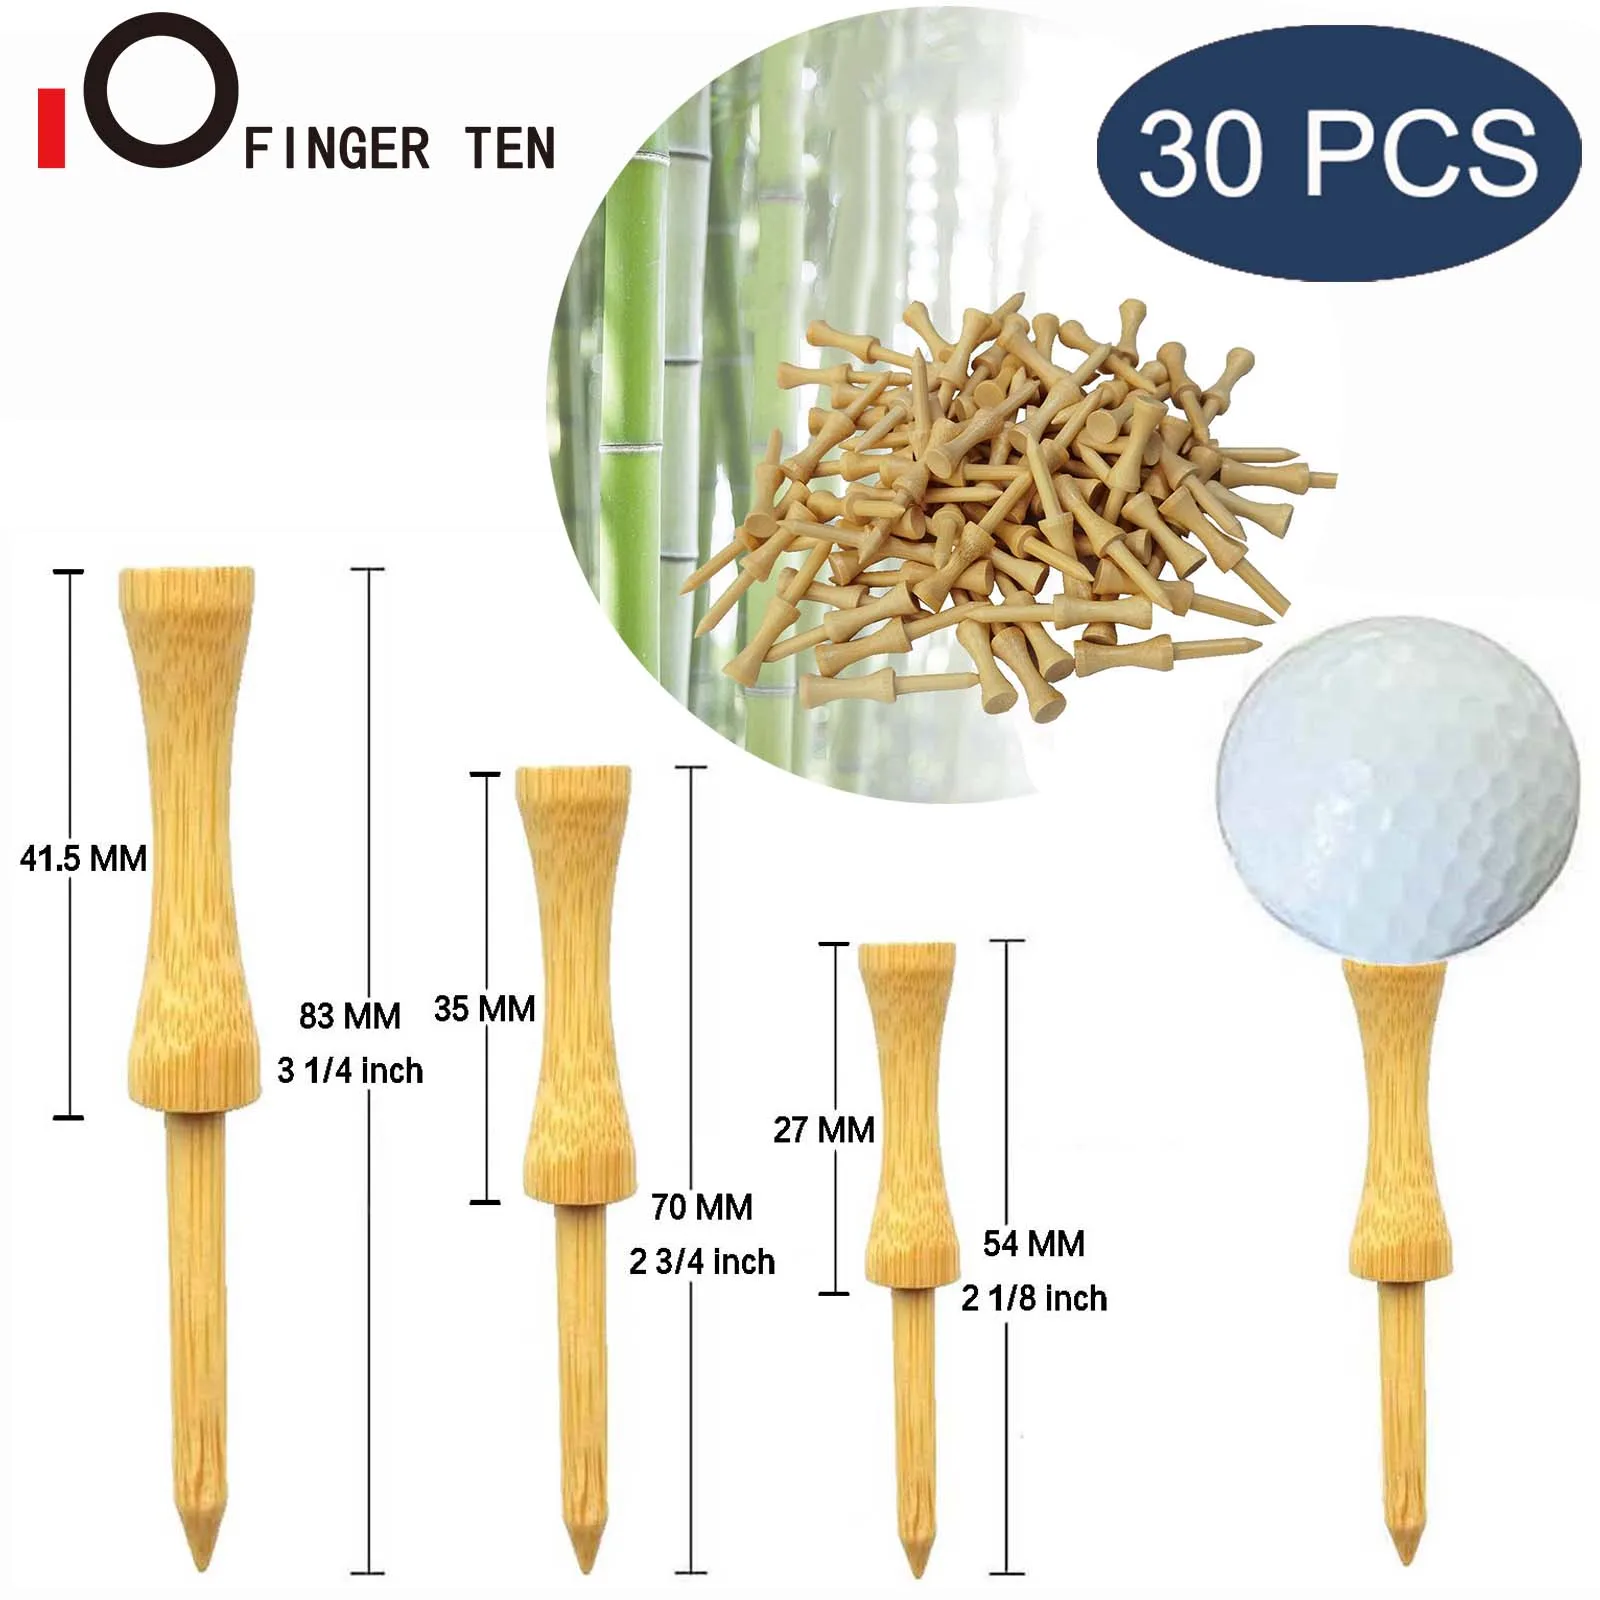 

New Set Unbreakable Golf Tees Wood Bamboo 54mm 70mm 83mm for Driving Durable Balls Holder Training Castle Tee Drop Shipping